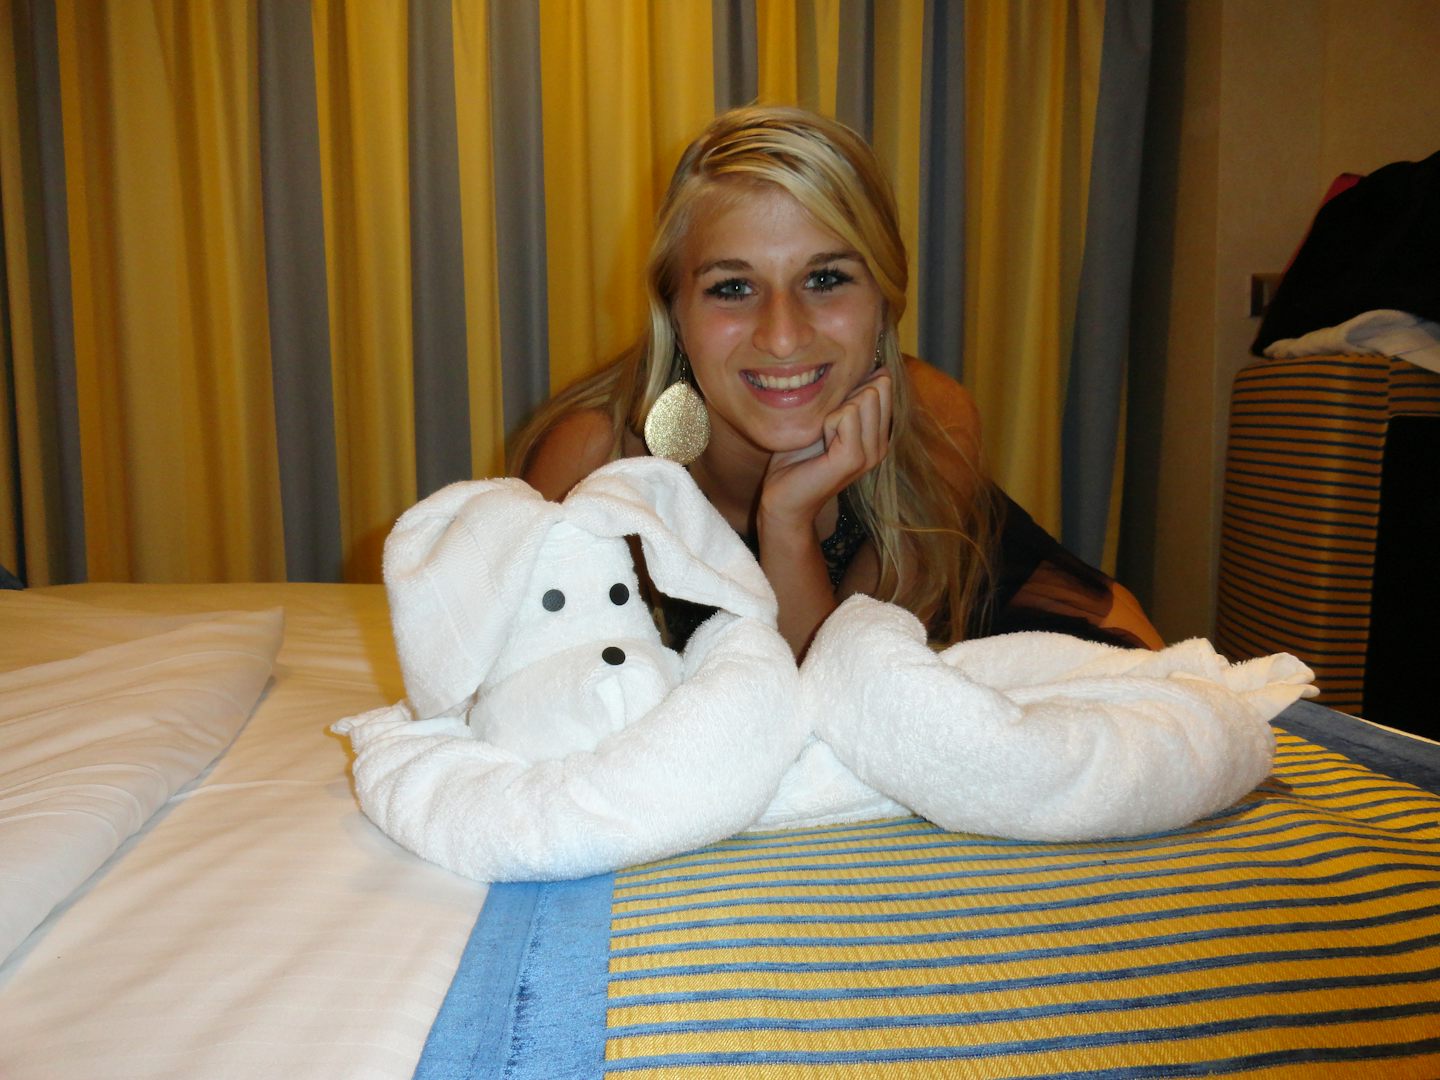 Every night we cant wait to see what the new towel animal will show up on the bed.  Simple FUN!